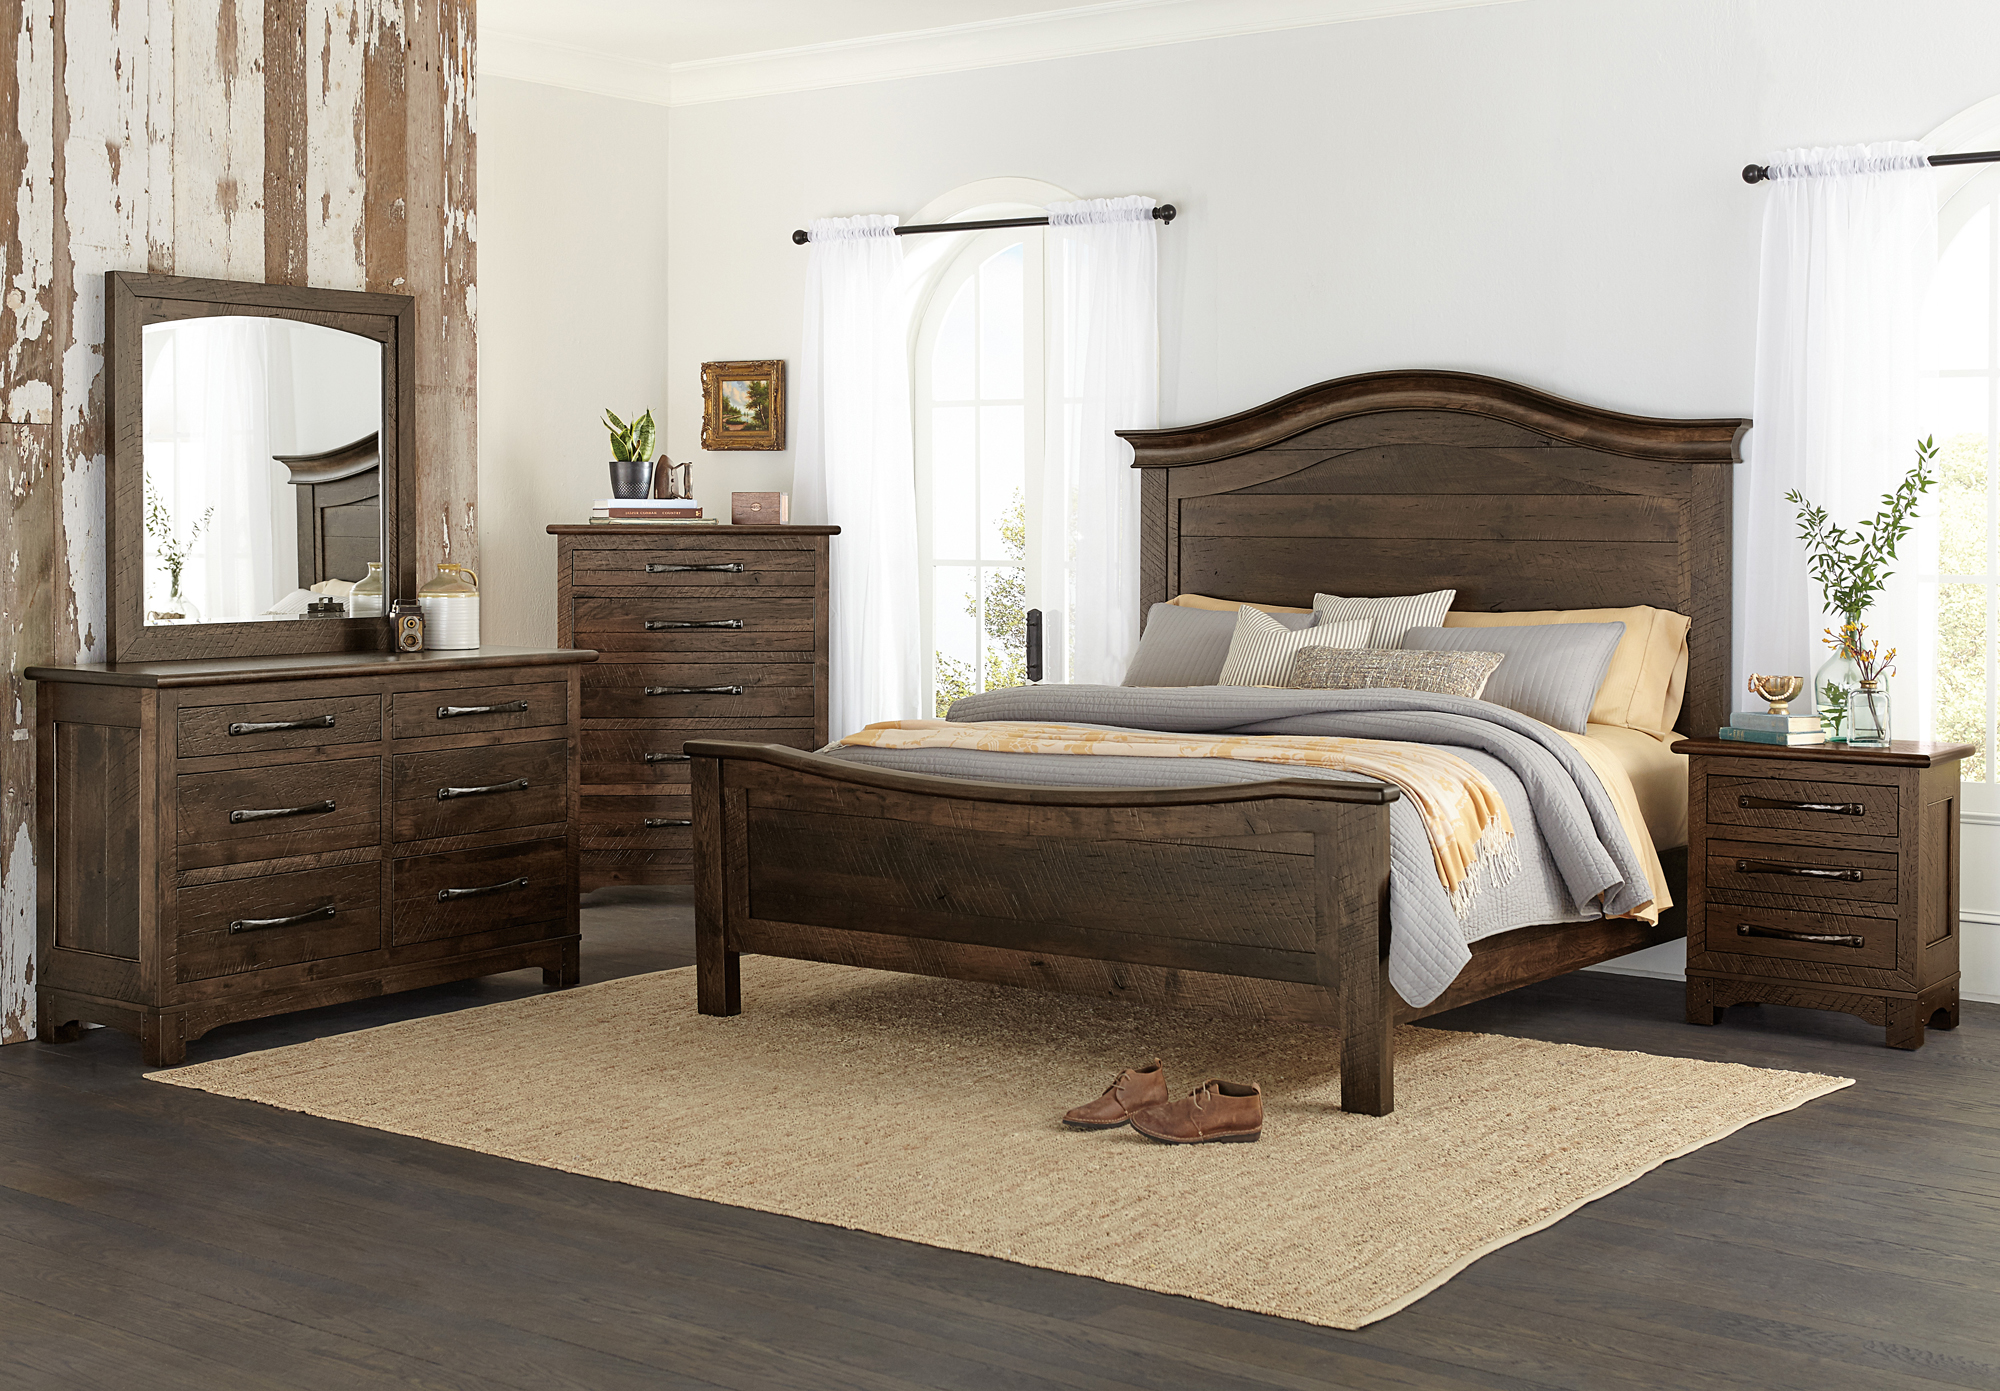 contemporary amish bedroom furniture